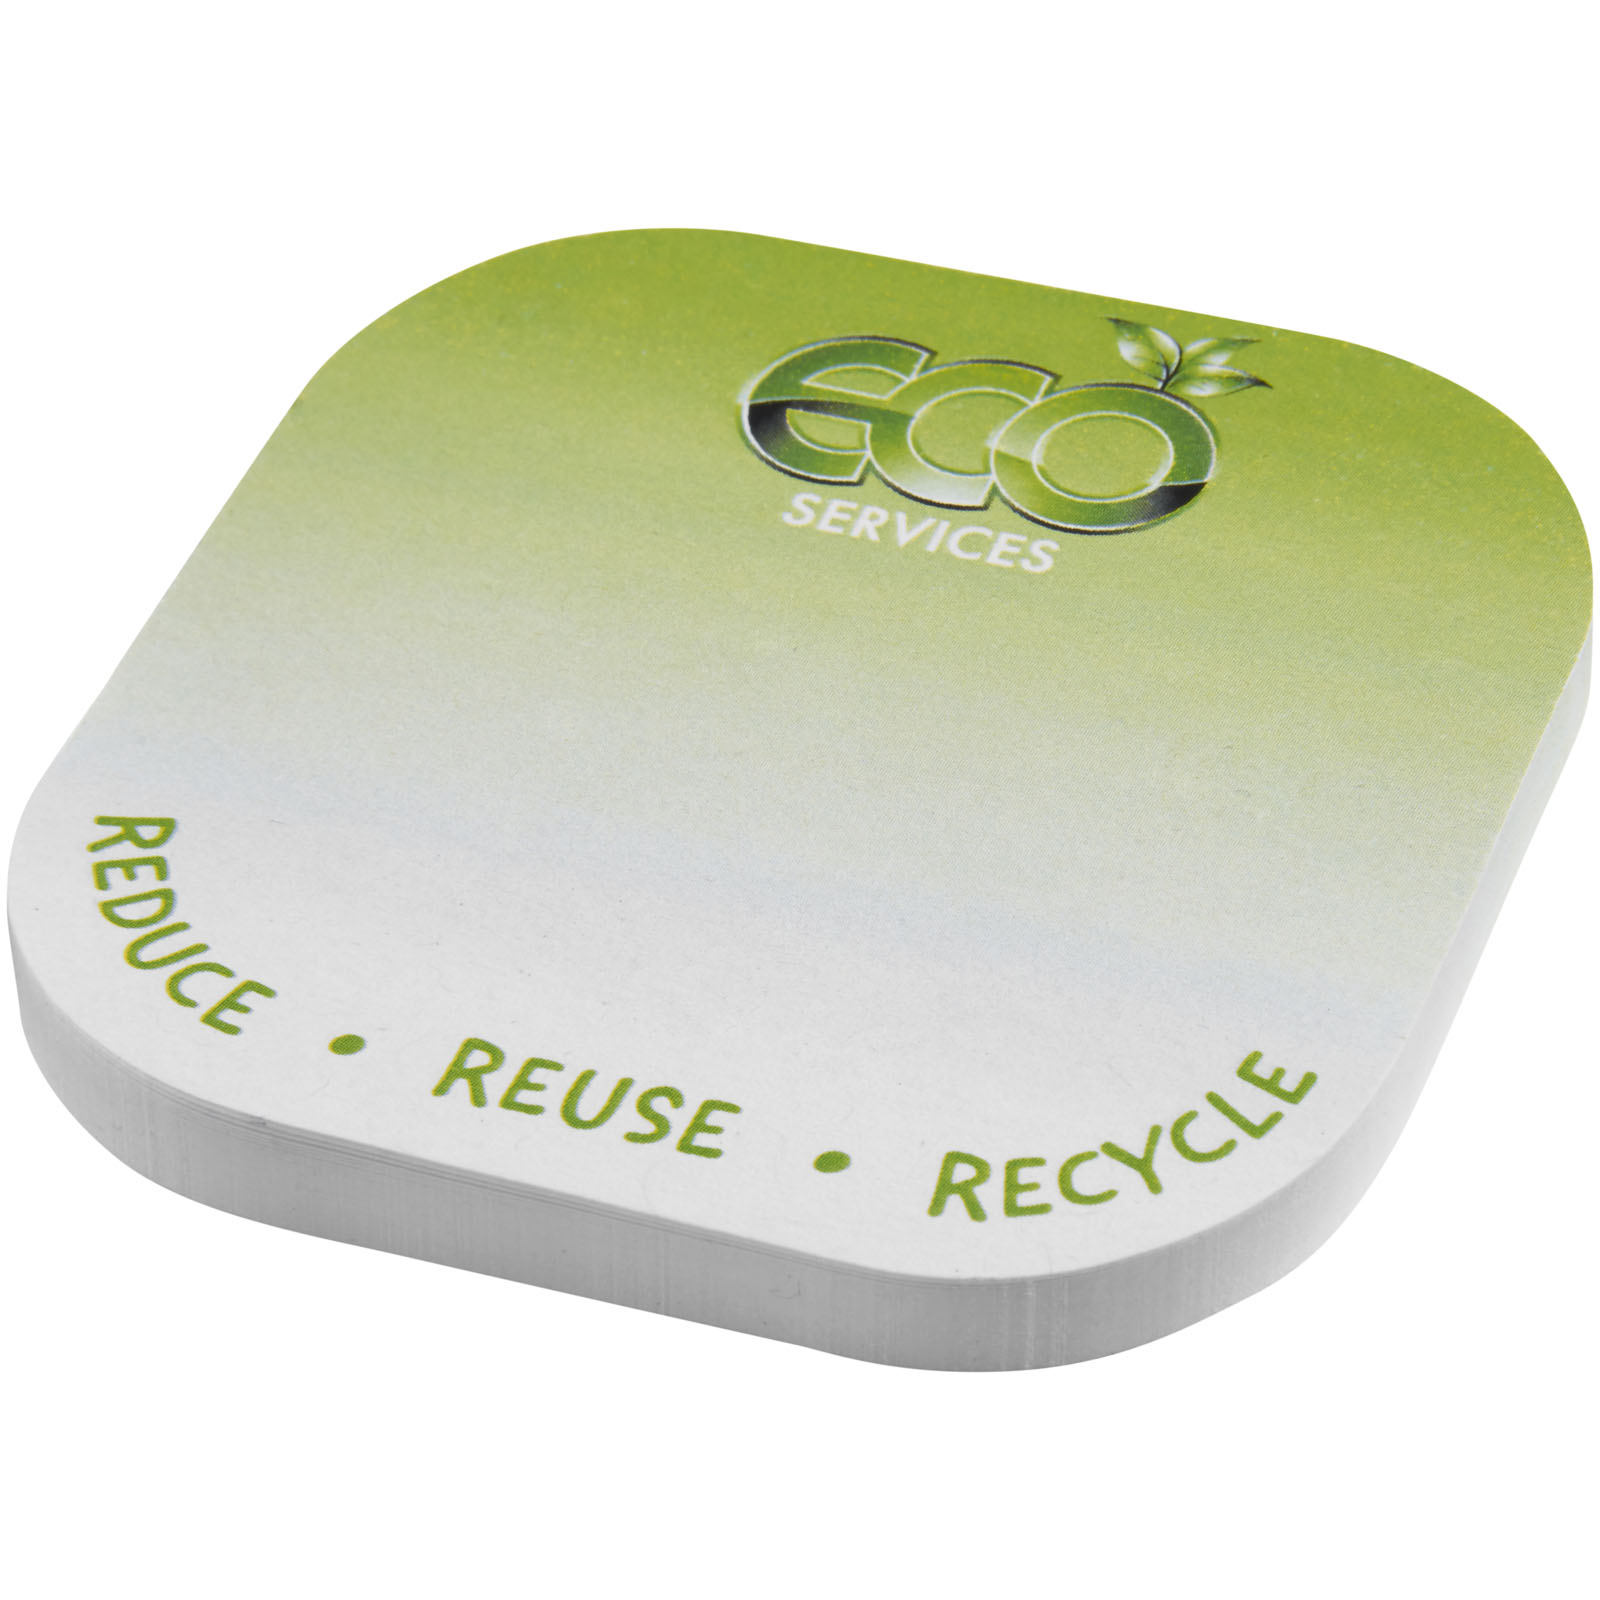 Advertising Sticky Notes - Sticky-Mate® square-shaped recycled sticky notes with rounded corners